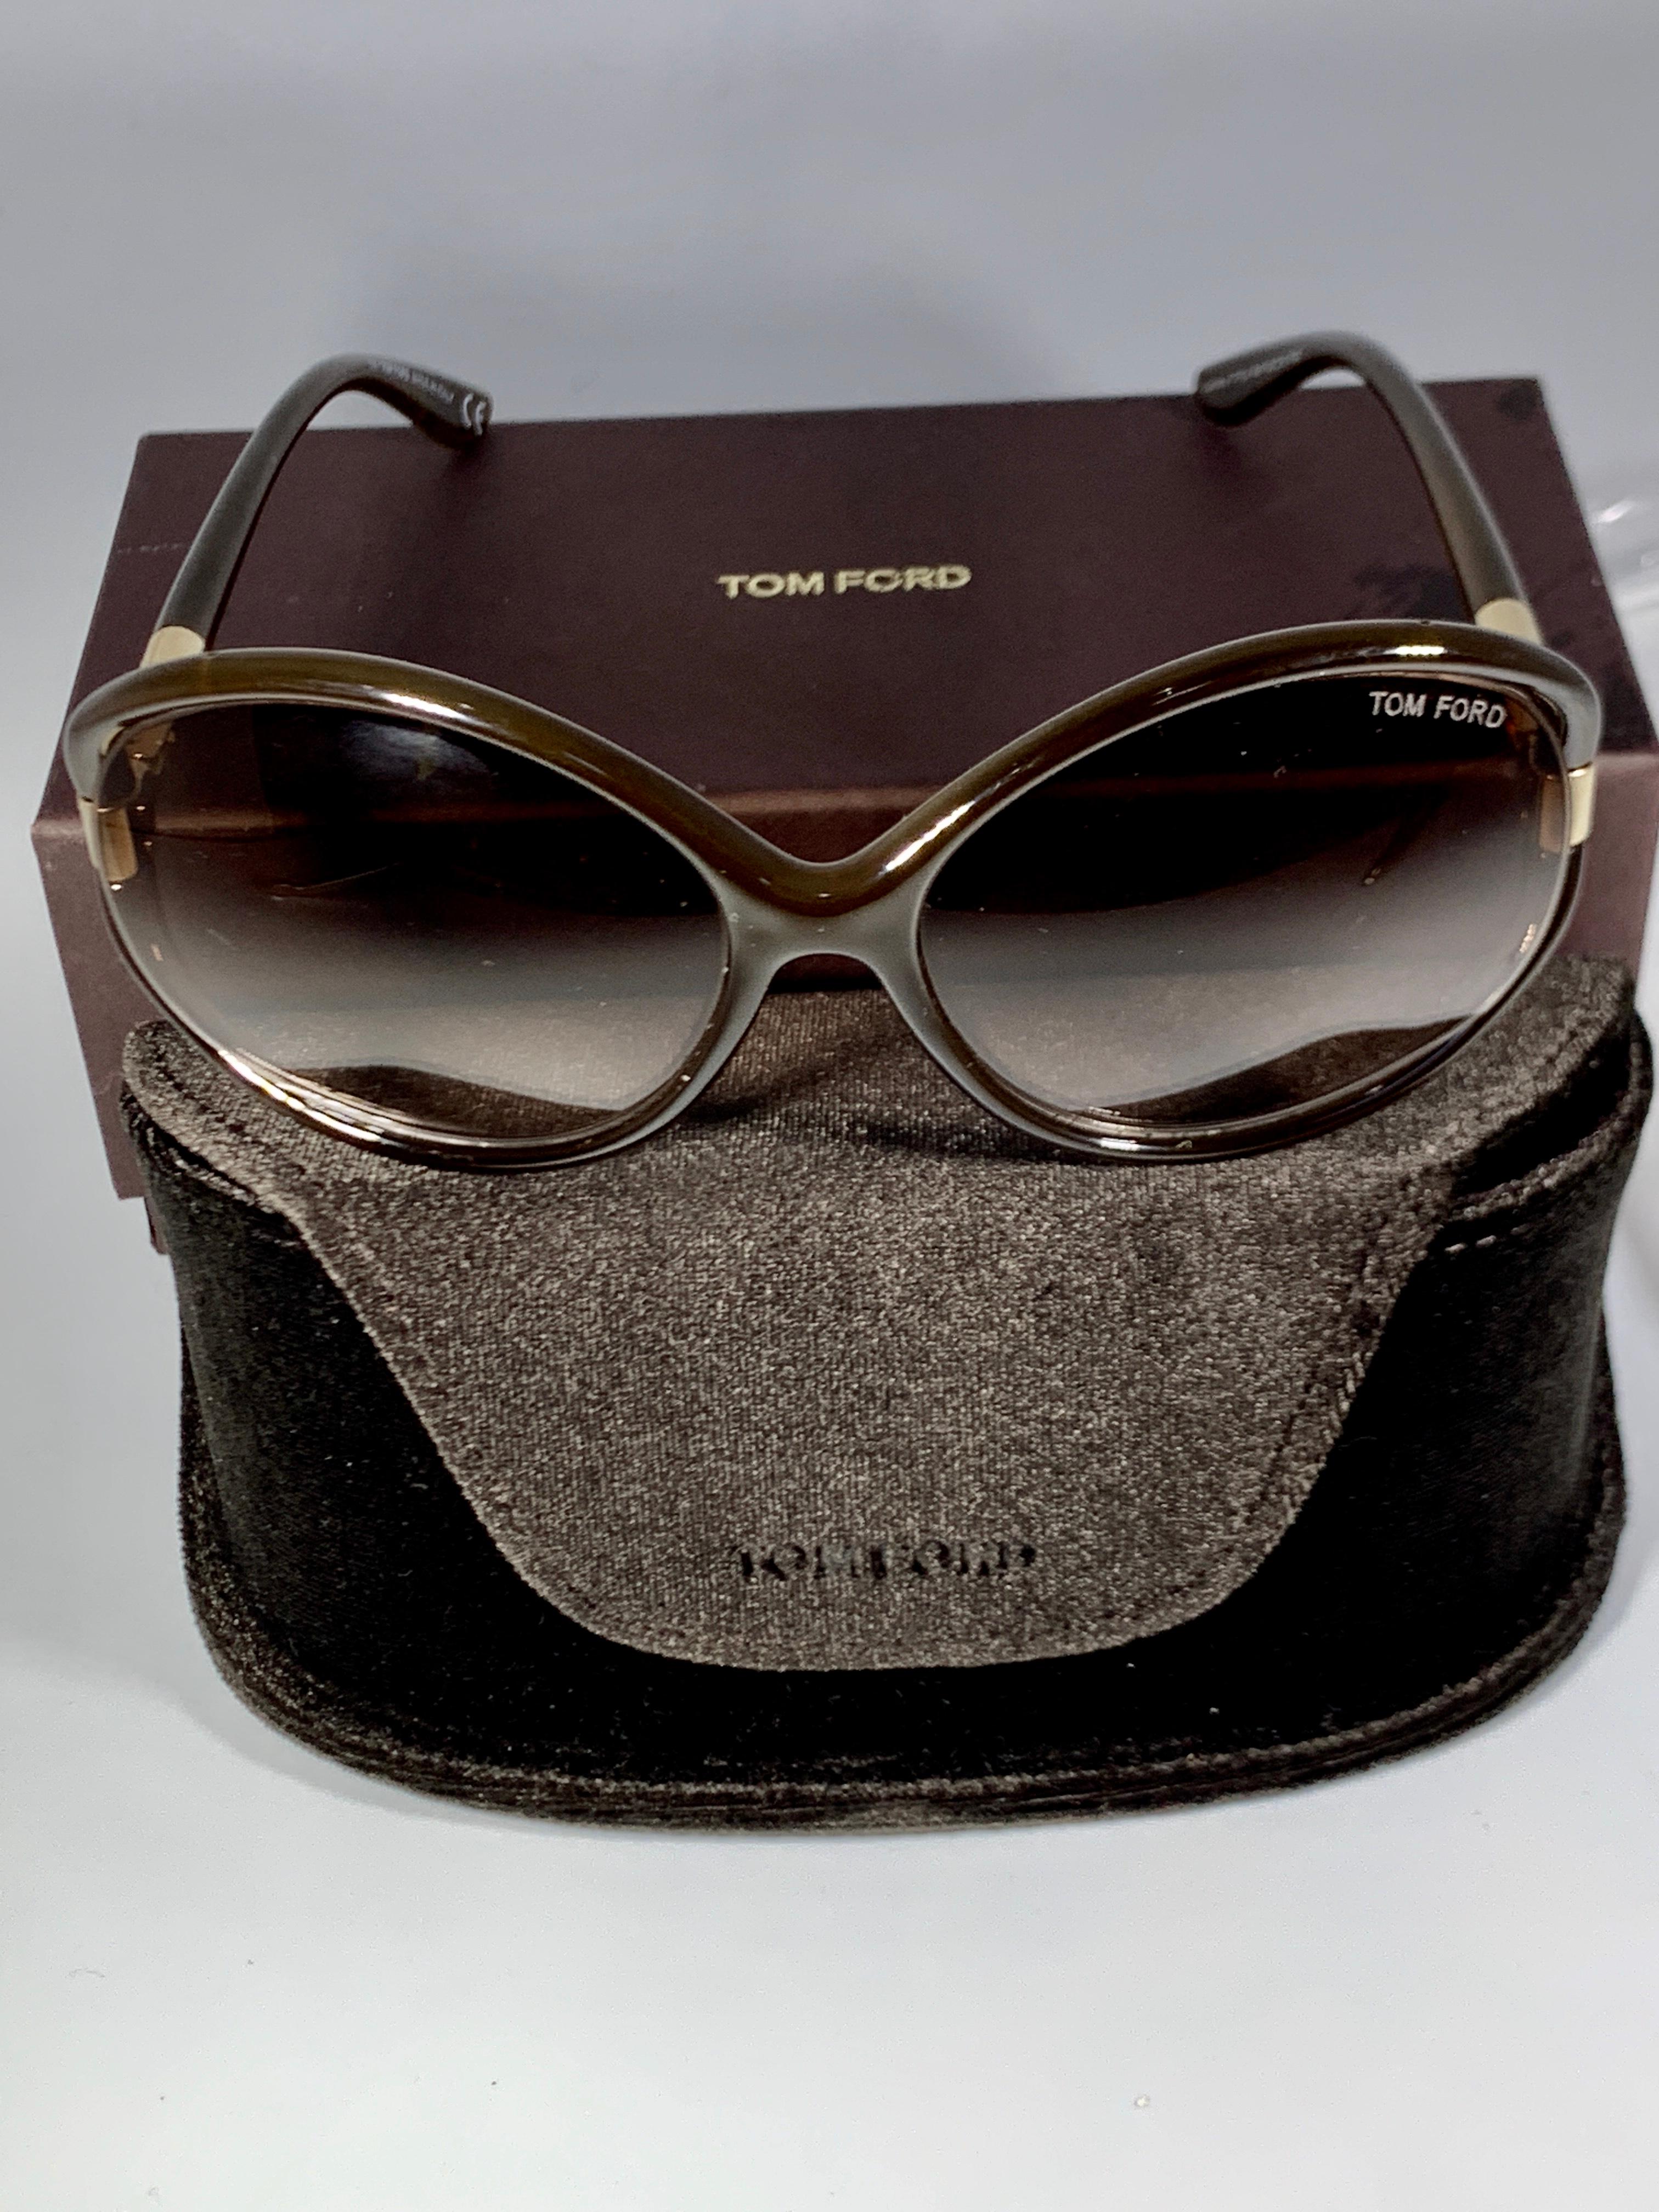 Tom Ford Brand New  FT0124 60-15-130 48F Brown Women Sunglasses, Made in Italy
Sandrine TF 124
48F
60   15  130
Great Gift just in time for Holidays
Amazing and High Fashionable Sun Glasses
Full money Back Guaranteed. 
Monalisa Jewelry Inc.
We are